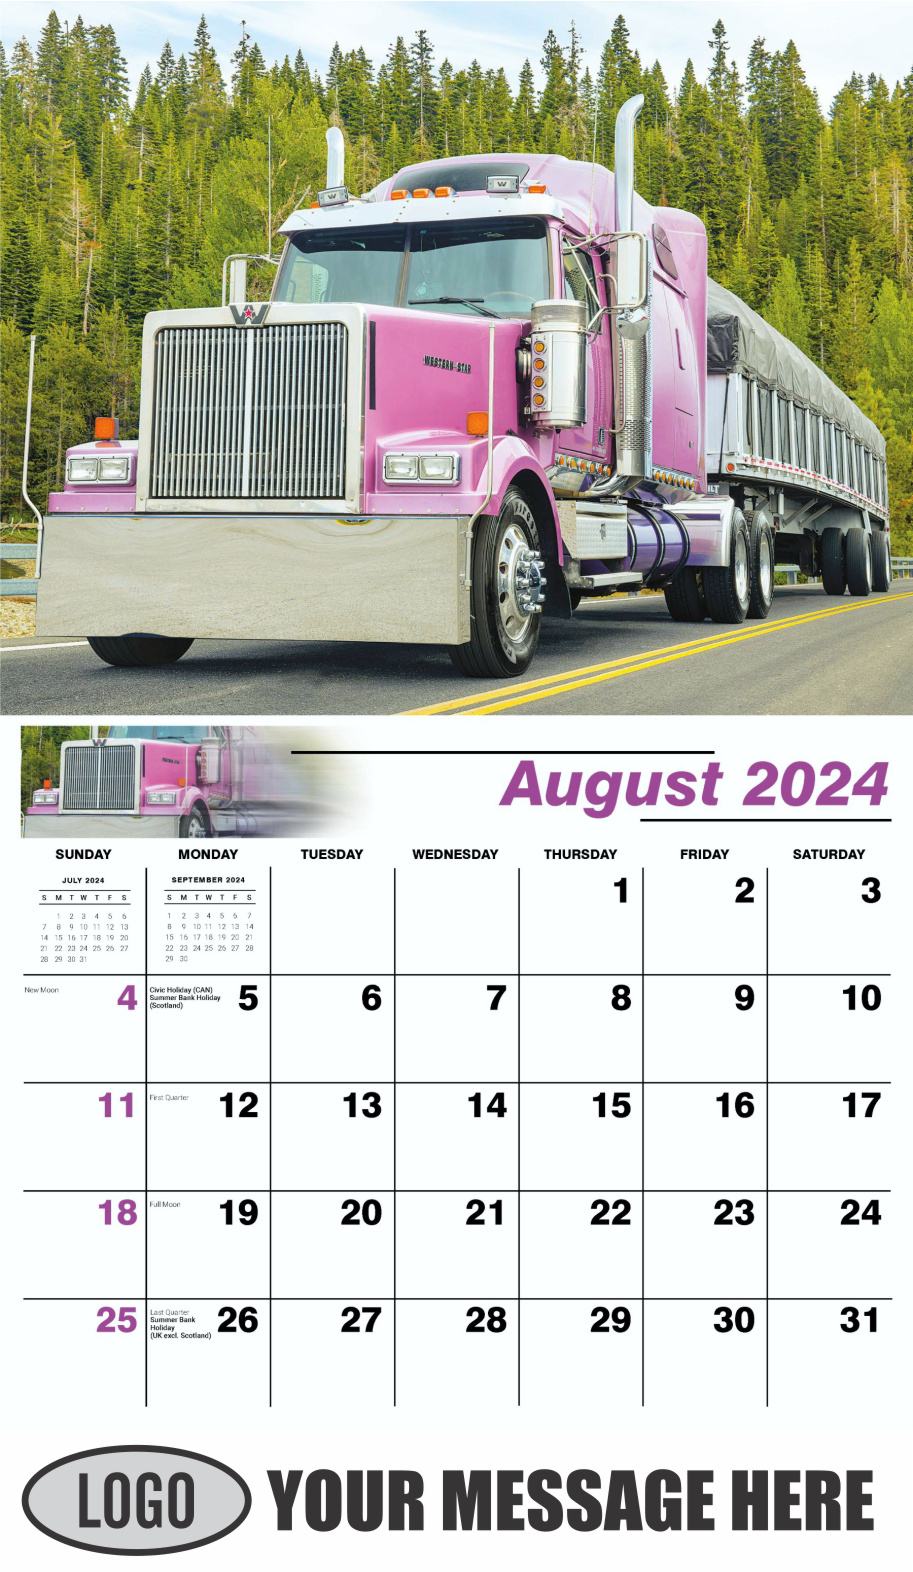 Kings of the Road 2024 Automotive Business Promotional Calendar - August